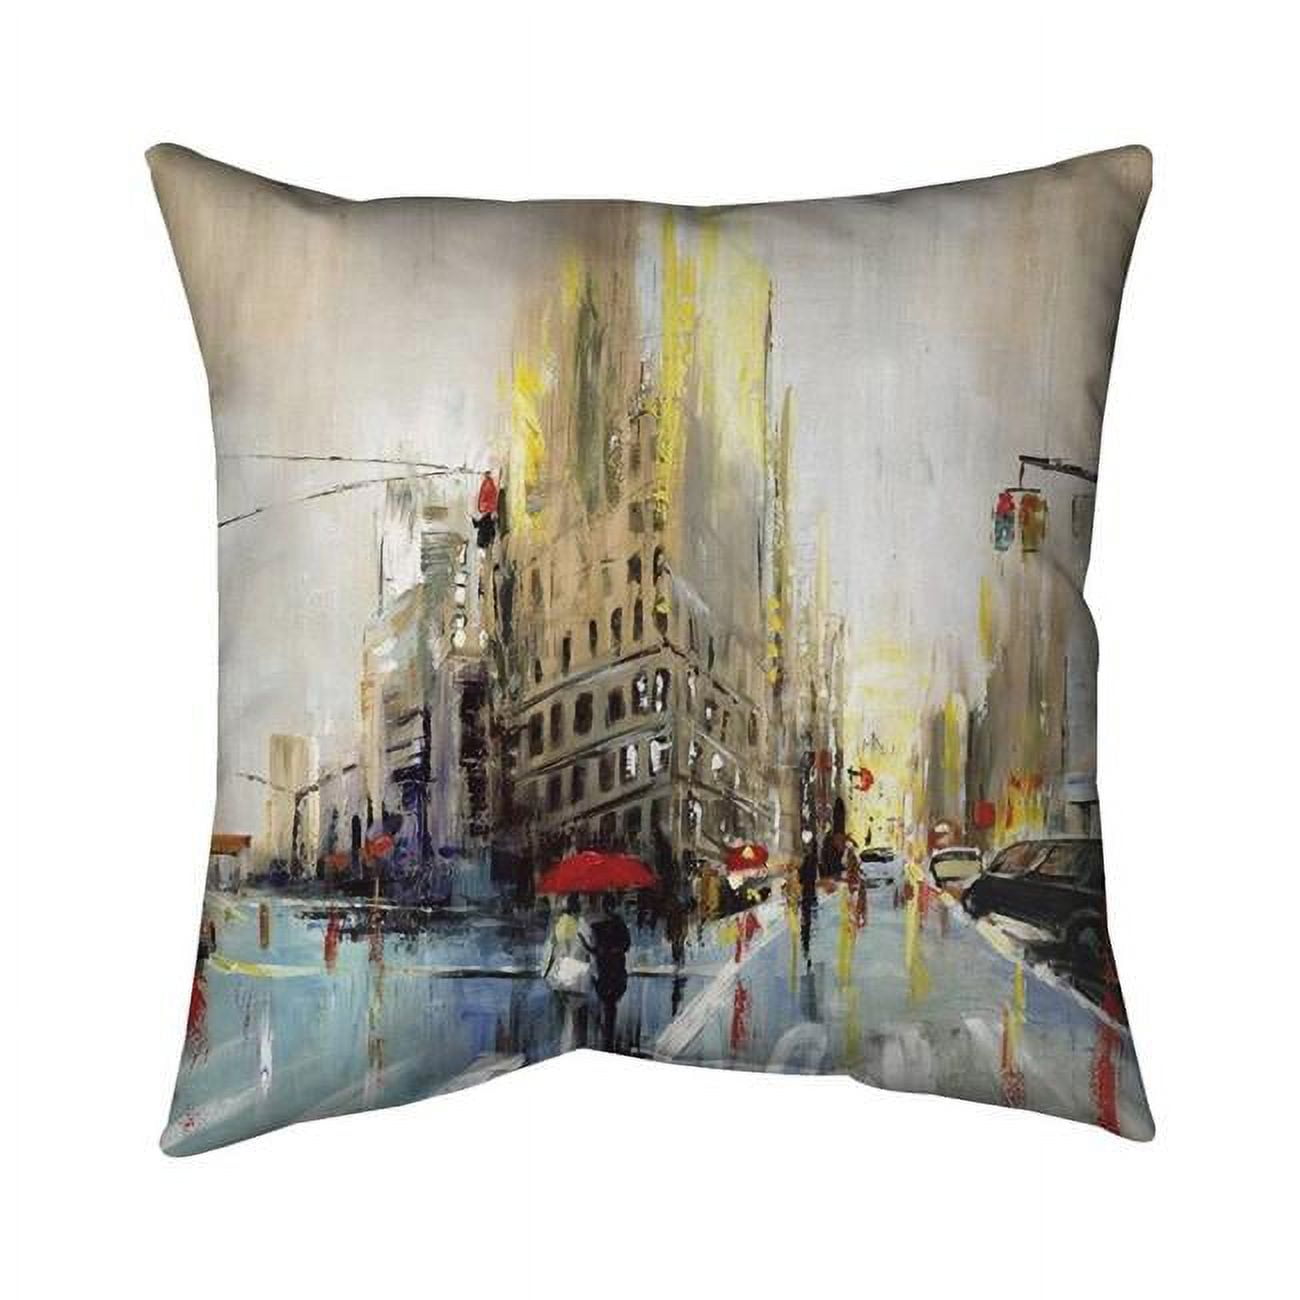 Begin Home Decor 5542-1616-CI1 16 x 16 in. Abstract Rainy Street-Double Sided Print Outdoor Pillow Cover